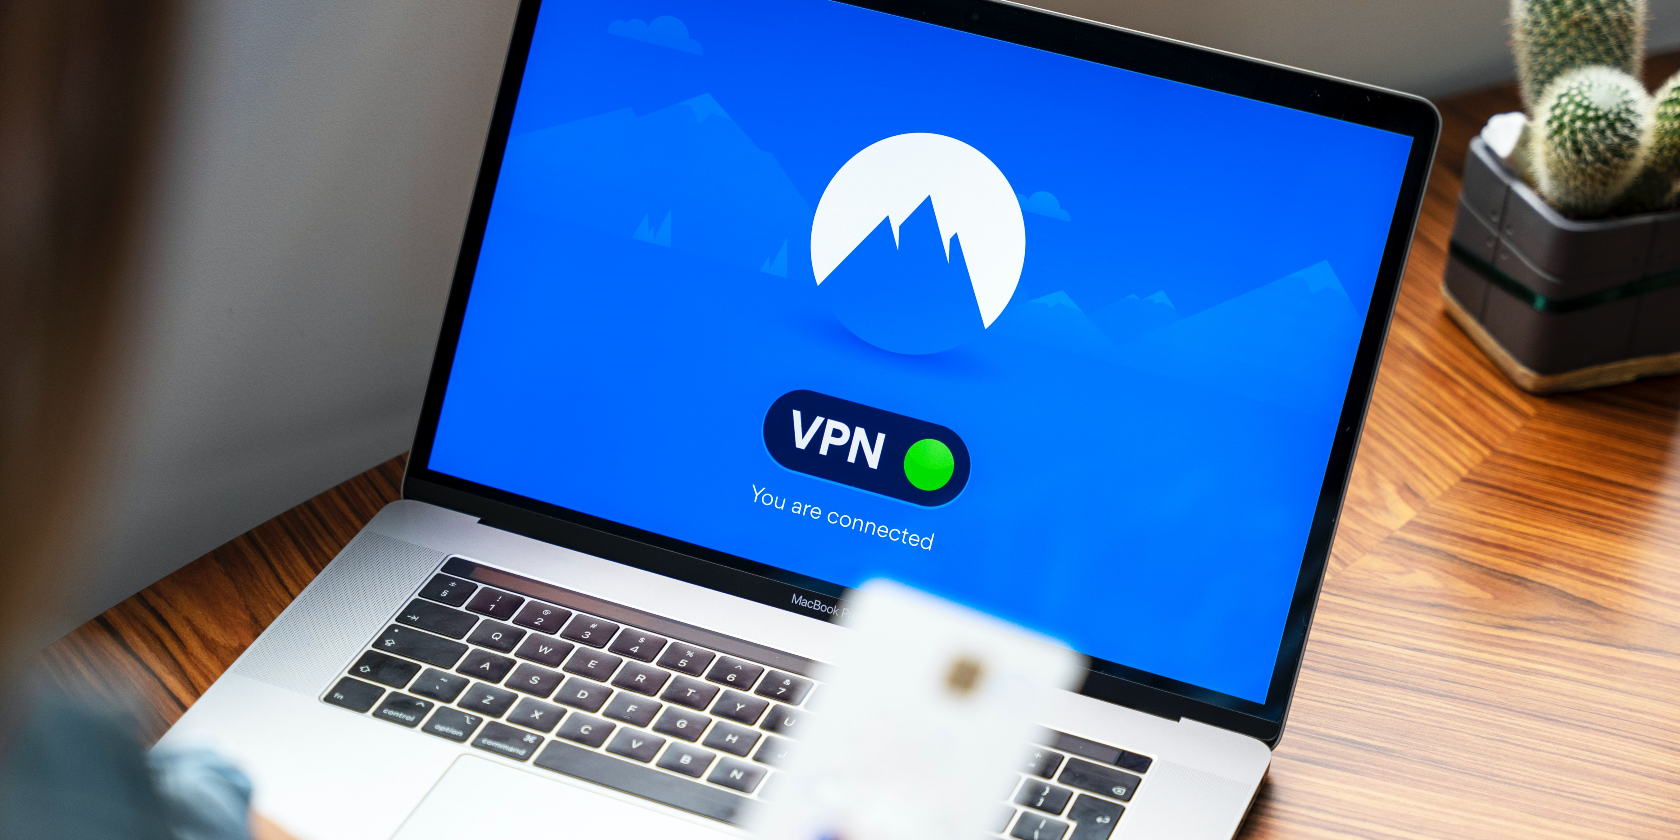 Photo of VPN network showing on computer screen